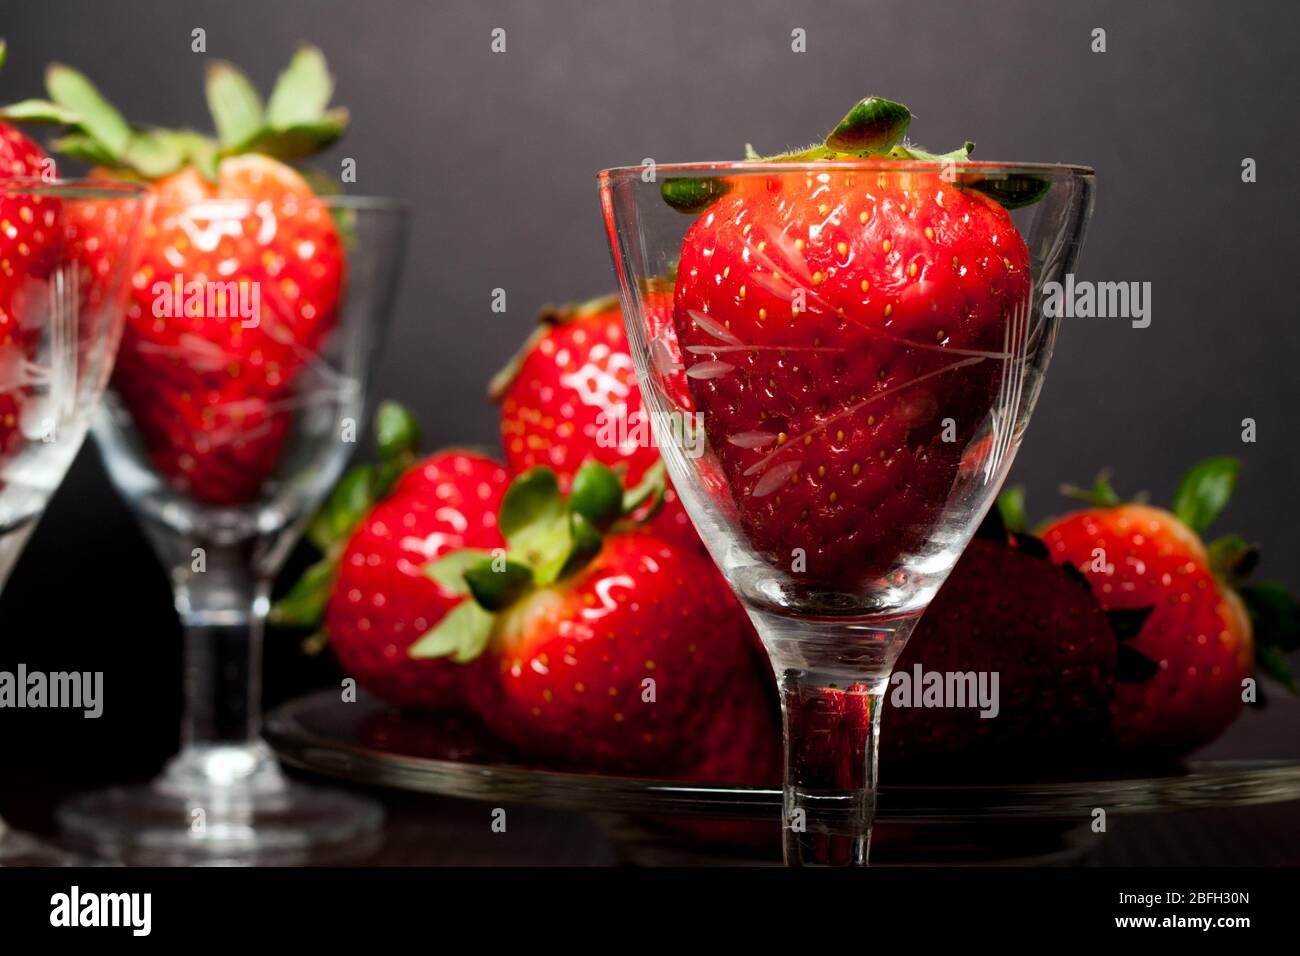 close-up of many strawberry fruit in a little decorated glass and on a plate Stock Photo